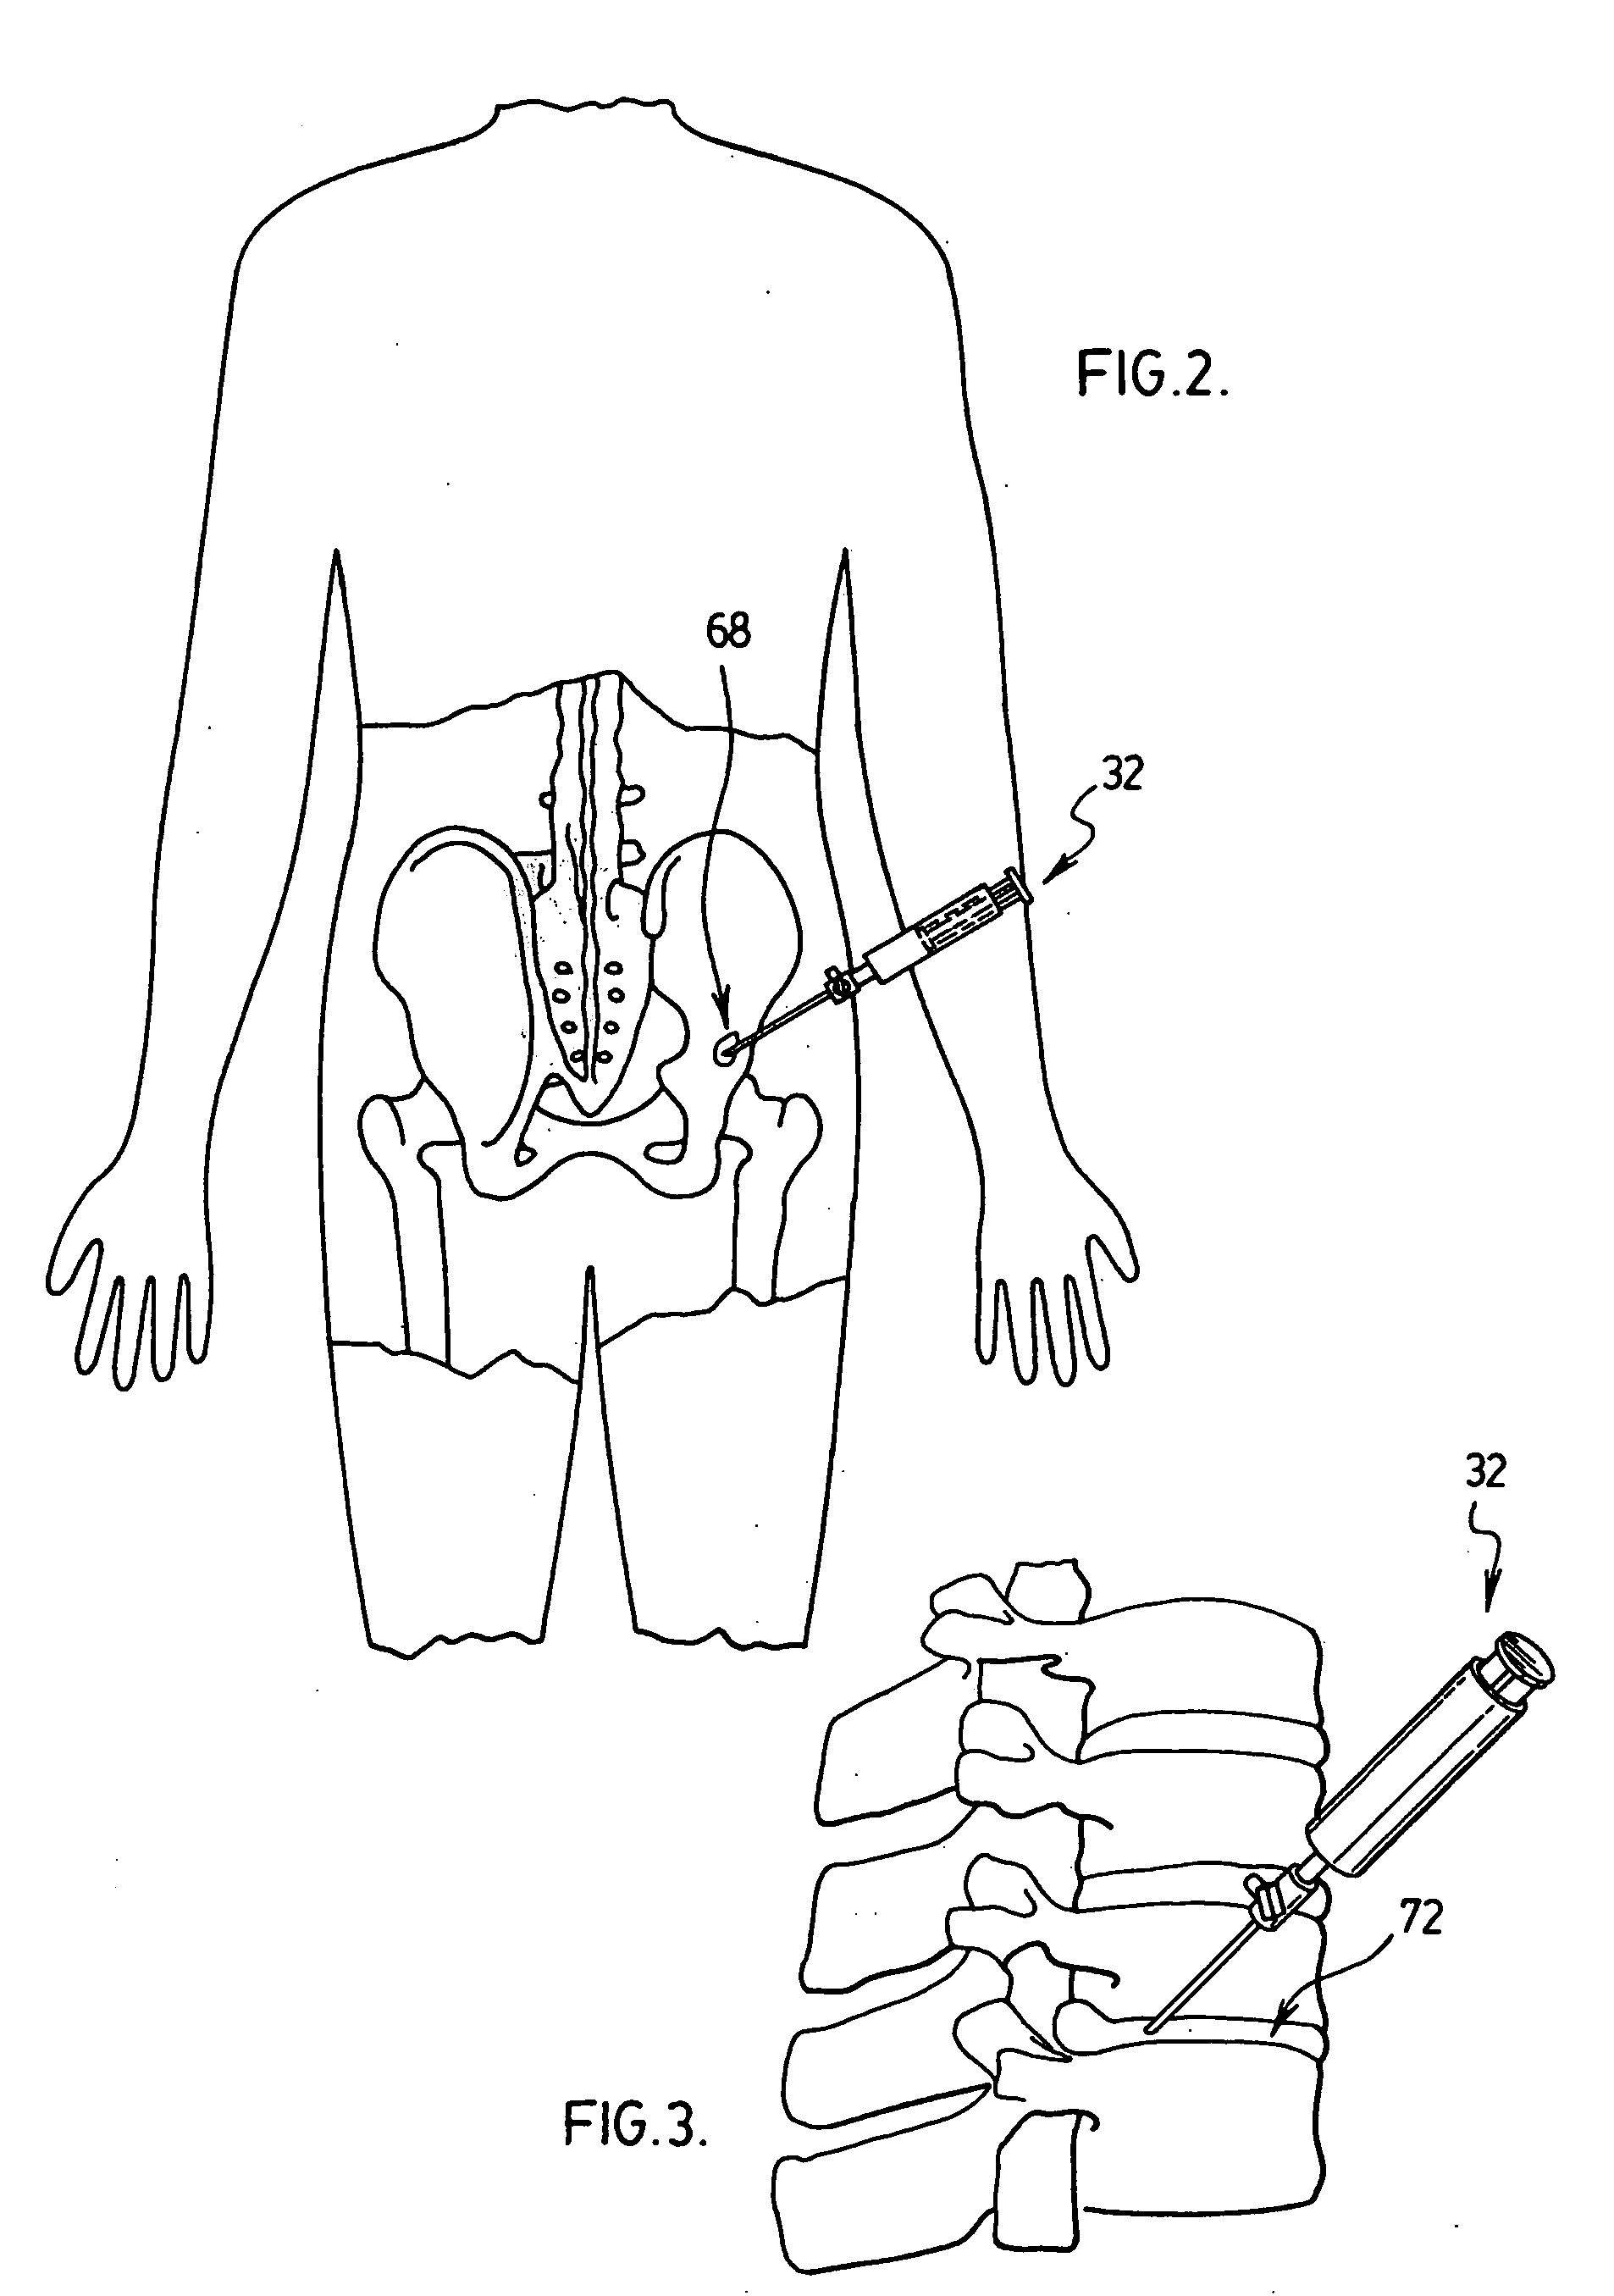 Apparatus and method for administering a therapeutic agent into tissue